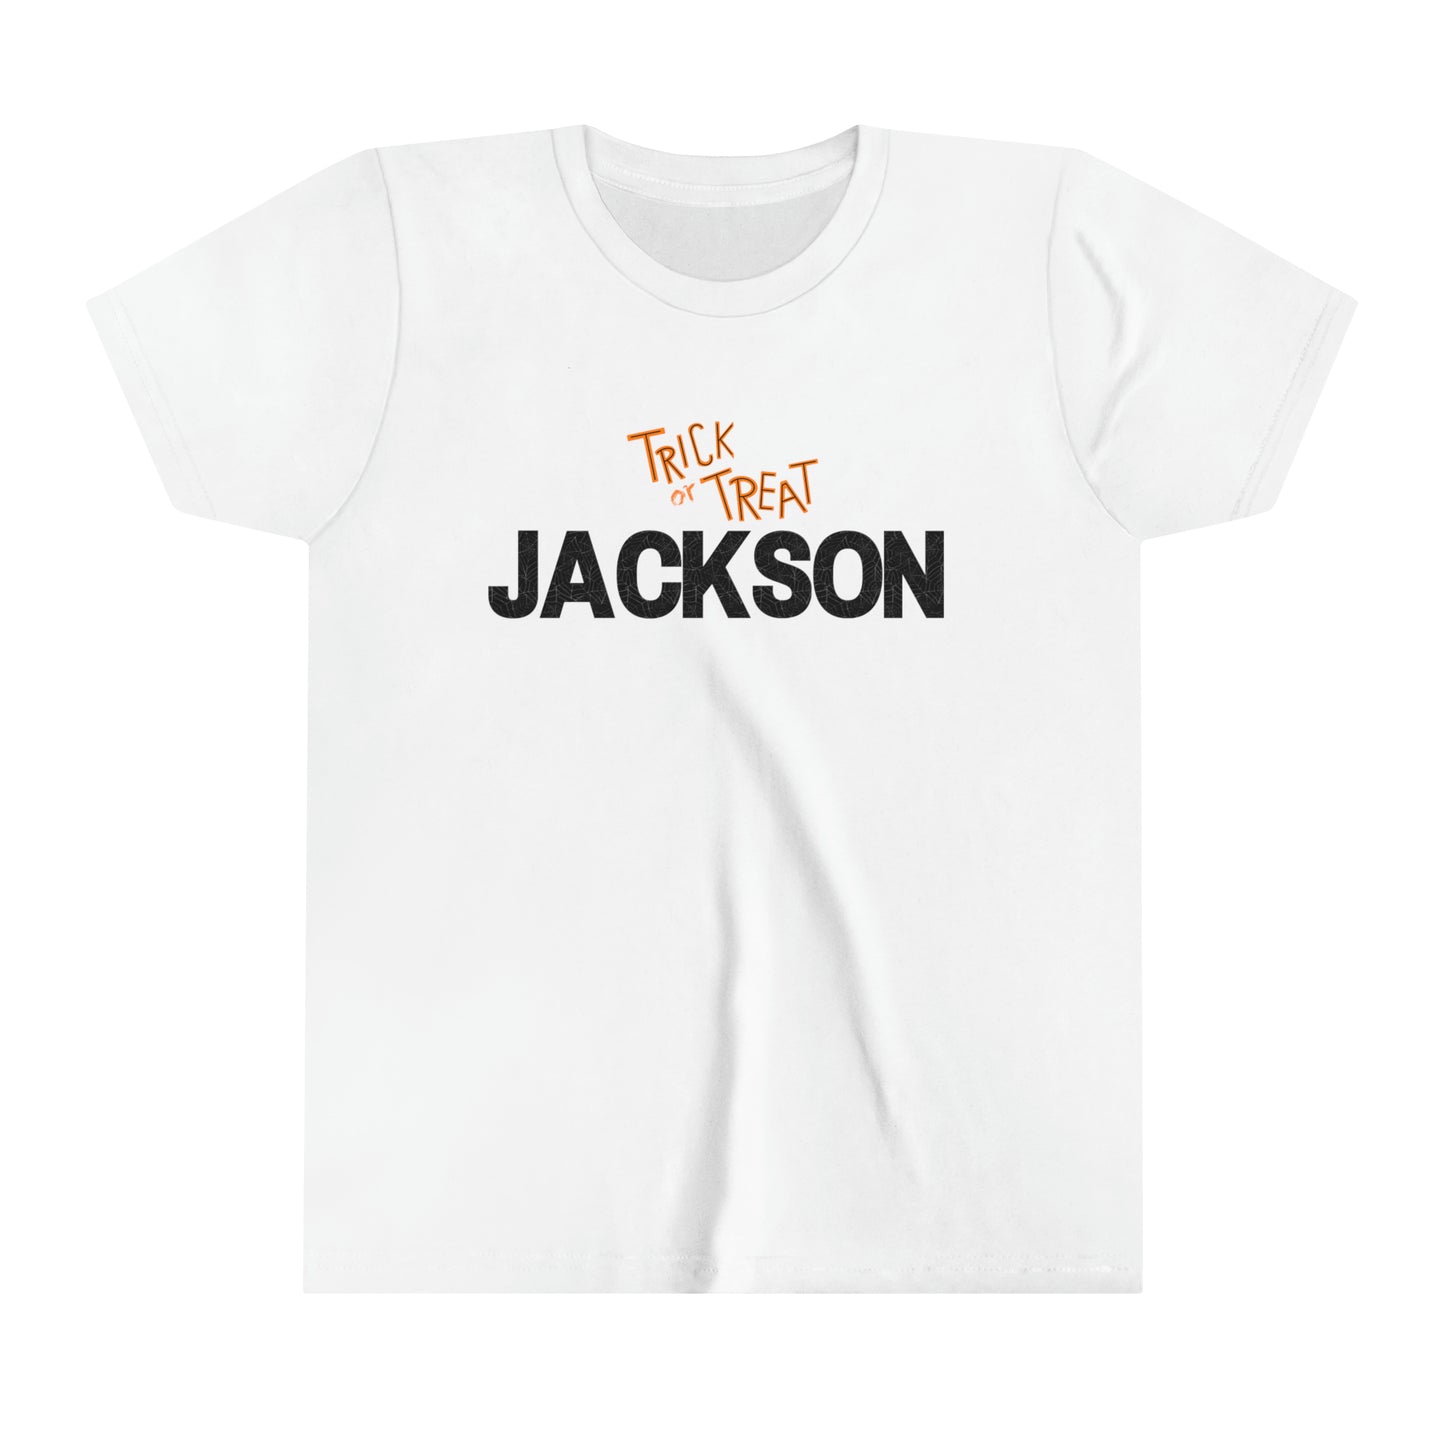 Trick-or-Treat Youth Personalized Halloween Tee